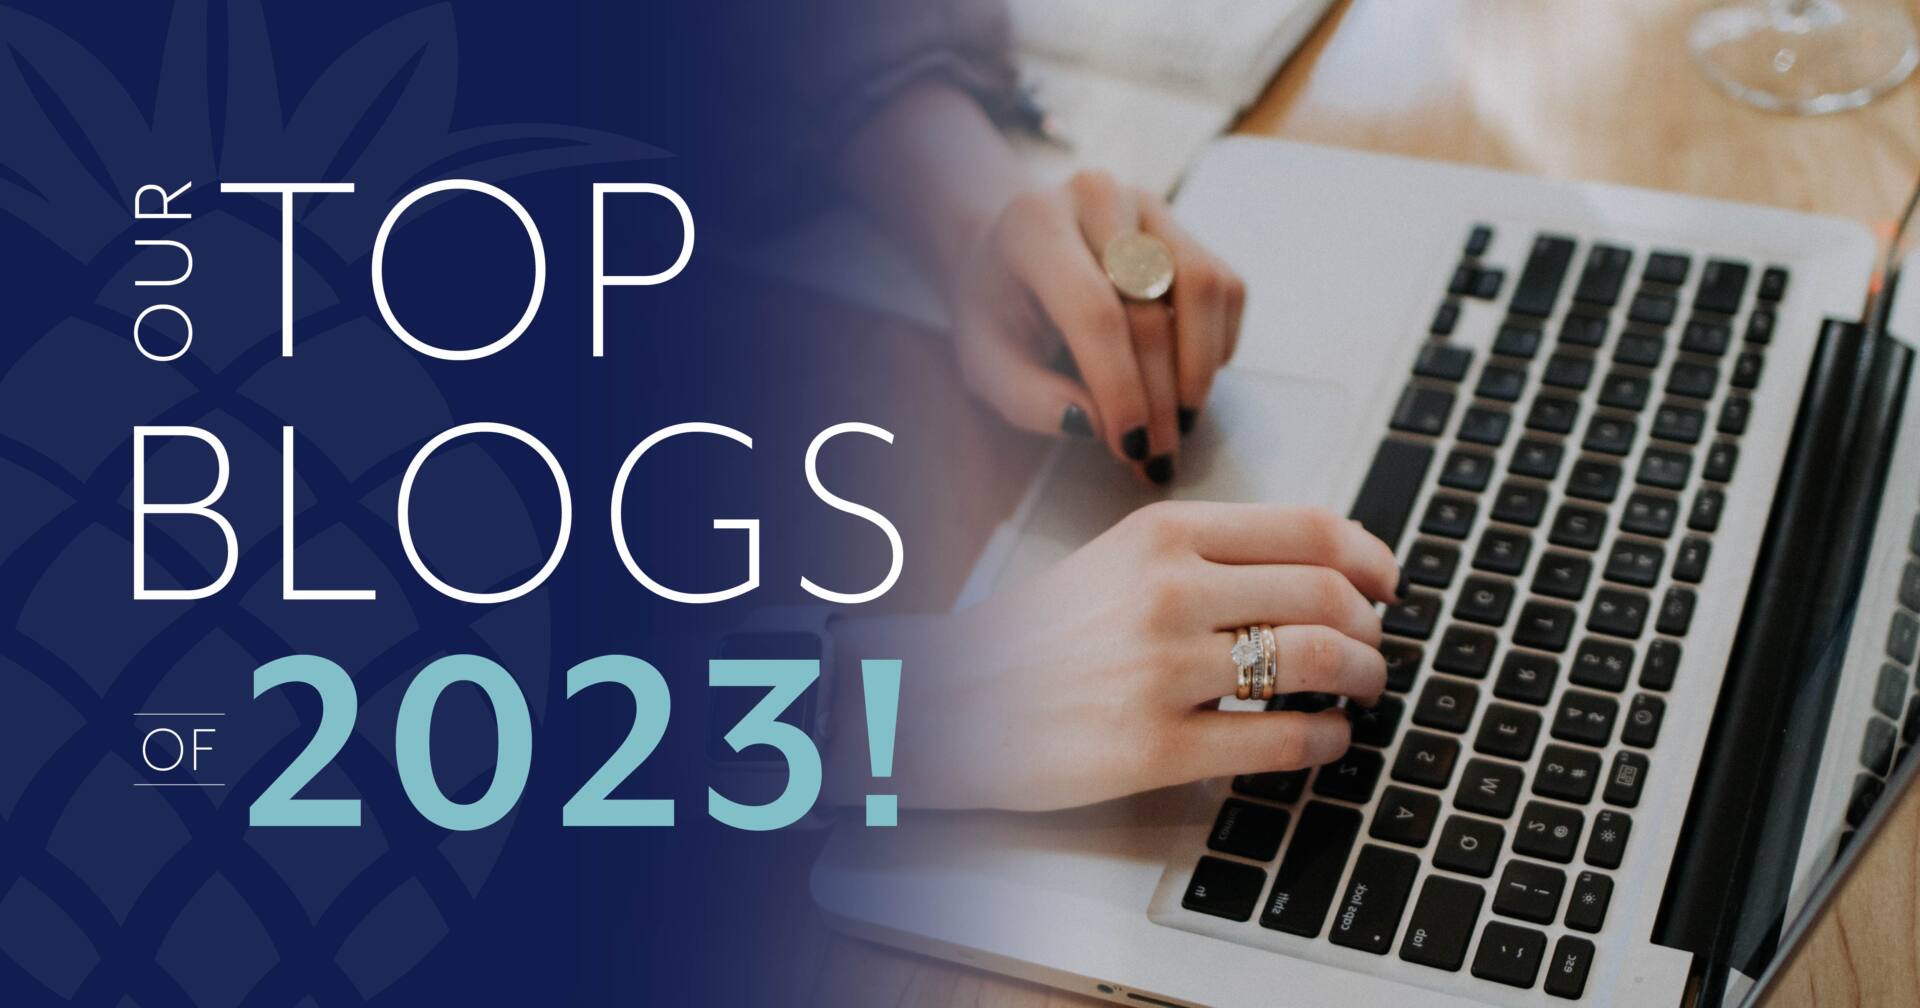 Our top blogs of 2023!